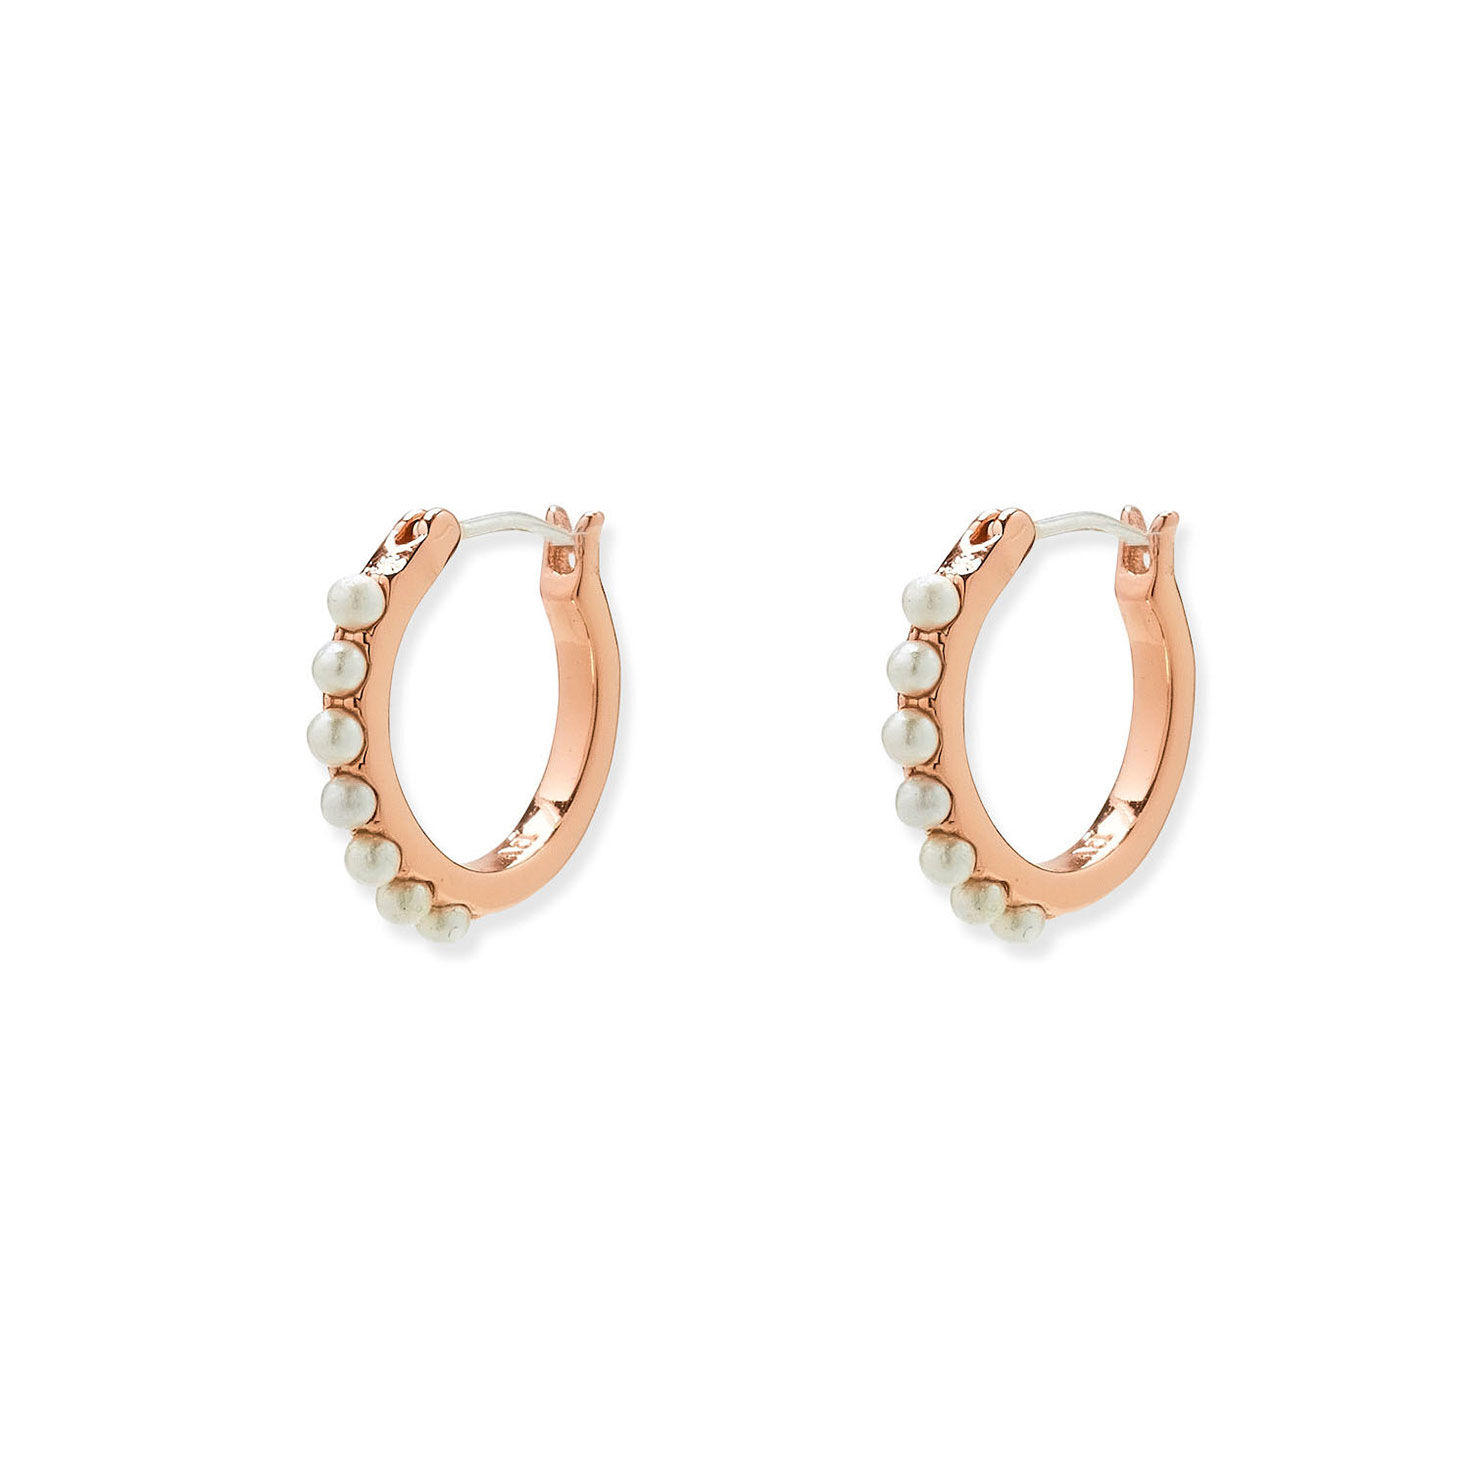 Pura Vida Rose Gold Pearl Pave Hoop Earrings for only USD 18.00 | Hallmark